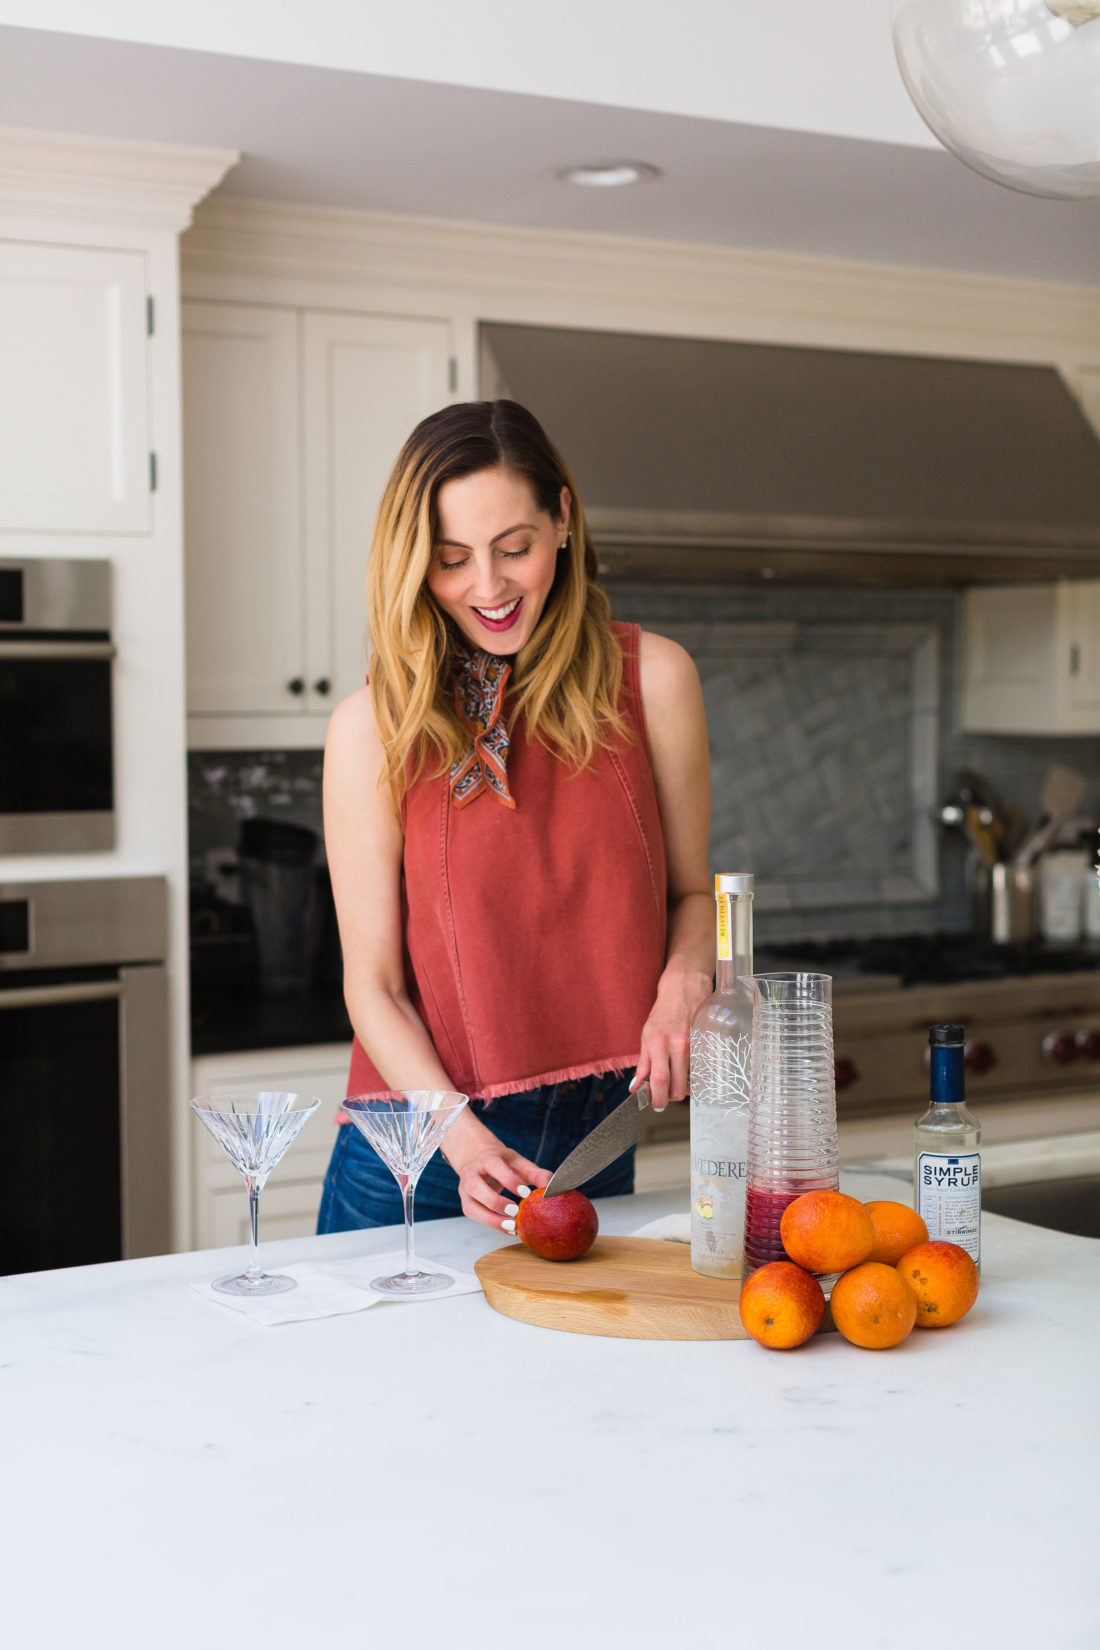 Eva Amurri Martino stands in the kitchen of her Connecticut home and slices blood oranges for martinis